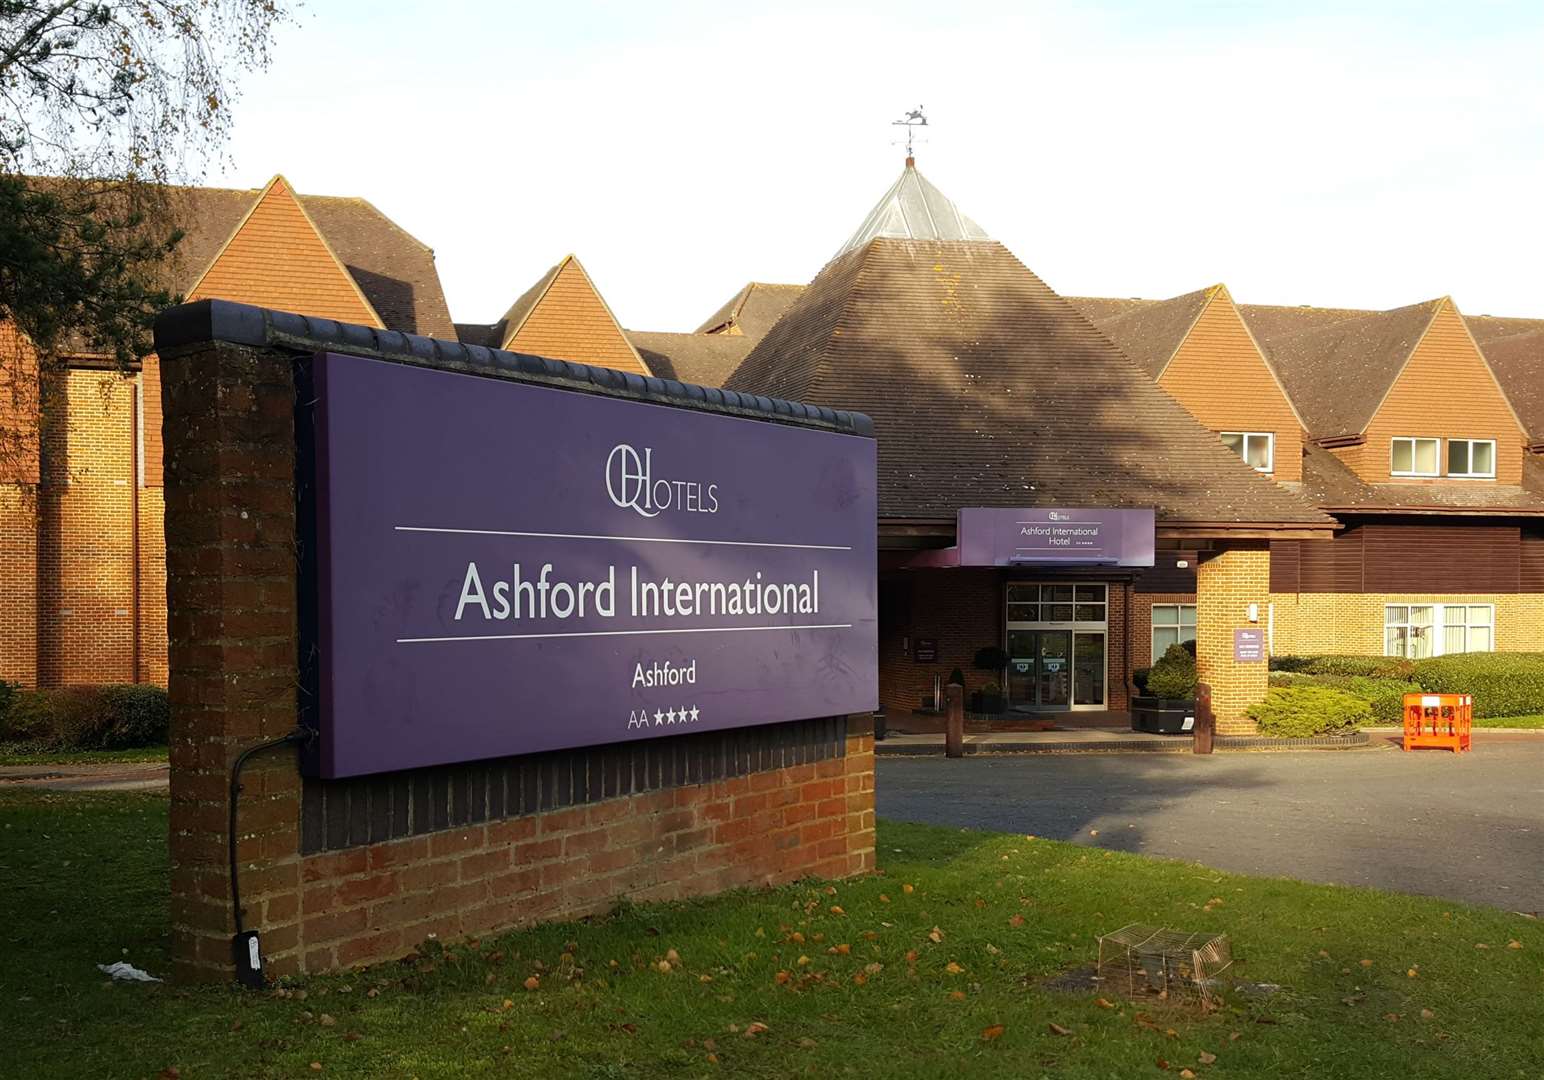 Freeman schemed to traffic Tom’s imaginary daughters to Ashford International Hotel. Stock picture